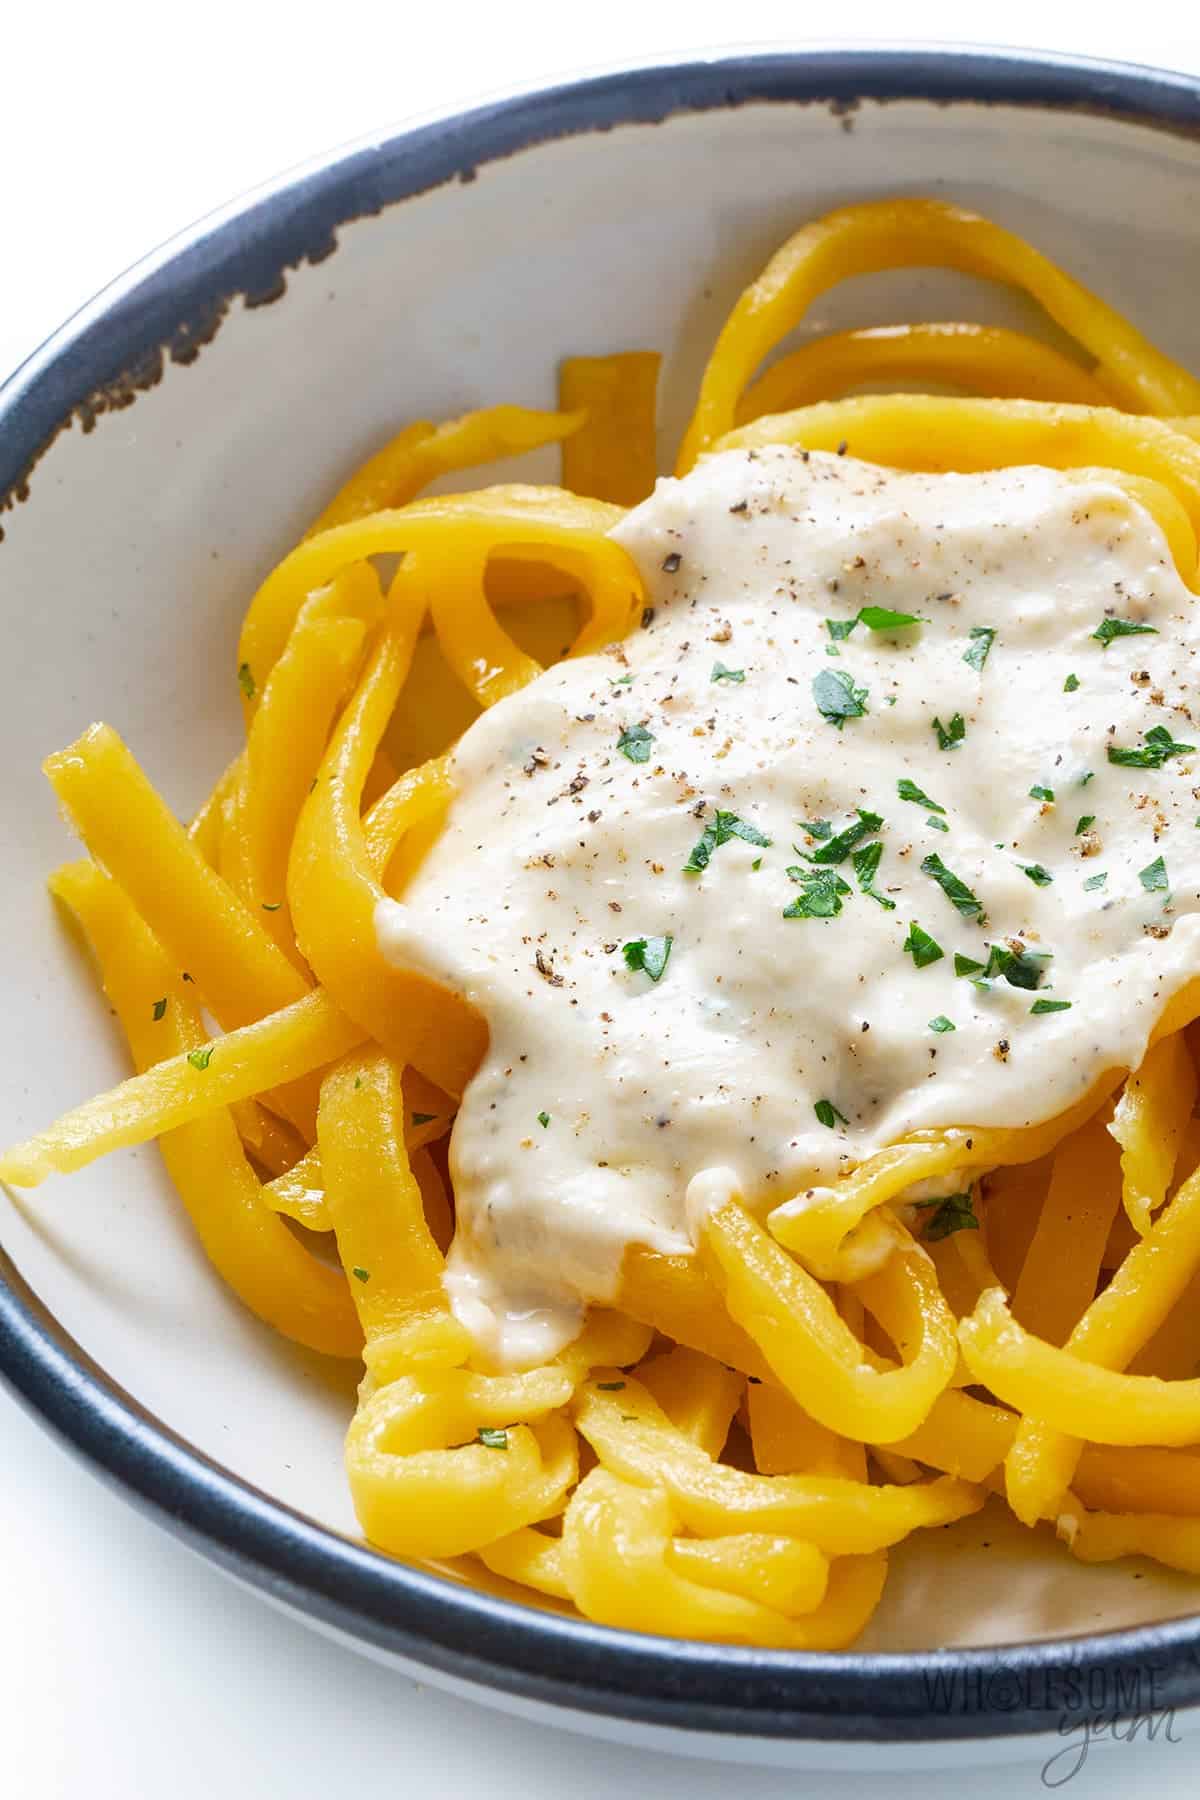 Lupin flour noodles with alfredo sauce